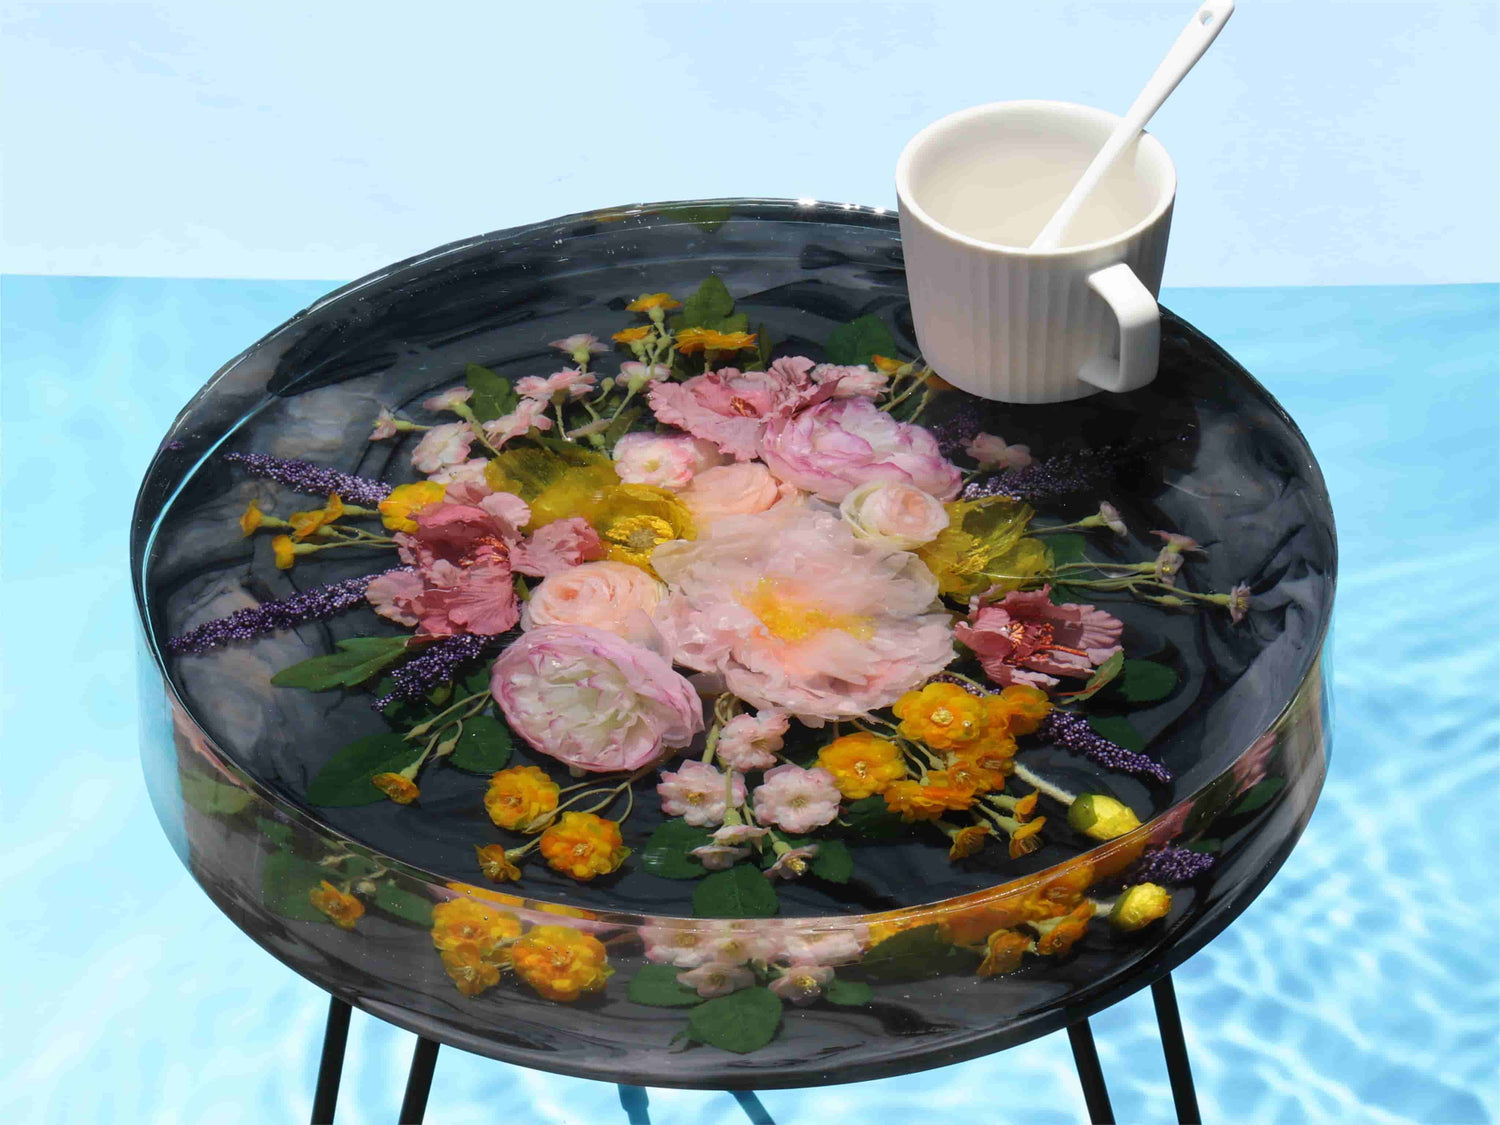 How to Make Amazing Table of Flowers